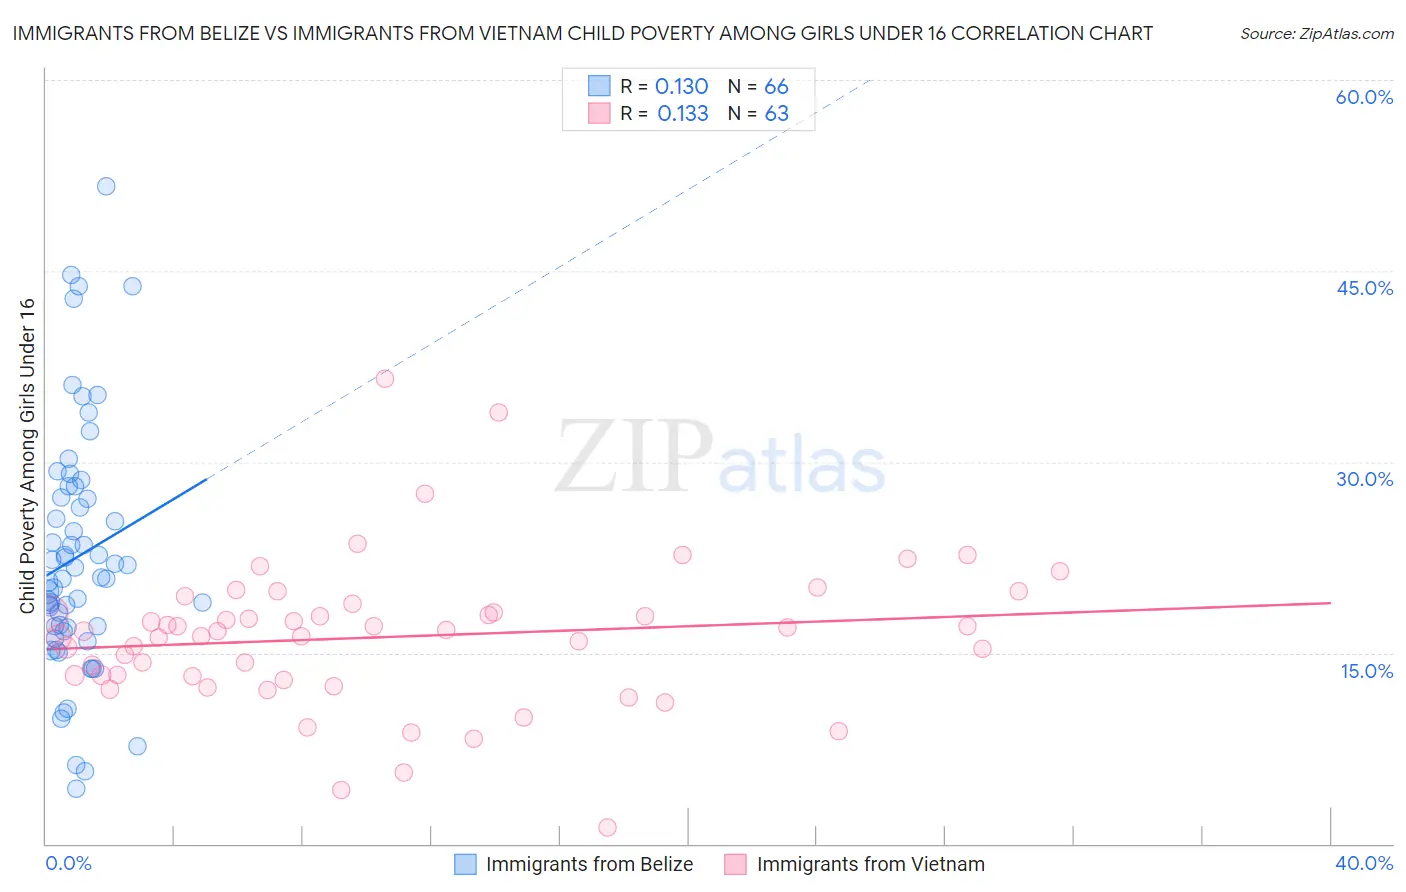 Immigrants from Belize vs Immigrants from Vietnam Child Poverty Among Girls Under 16